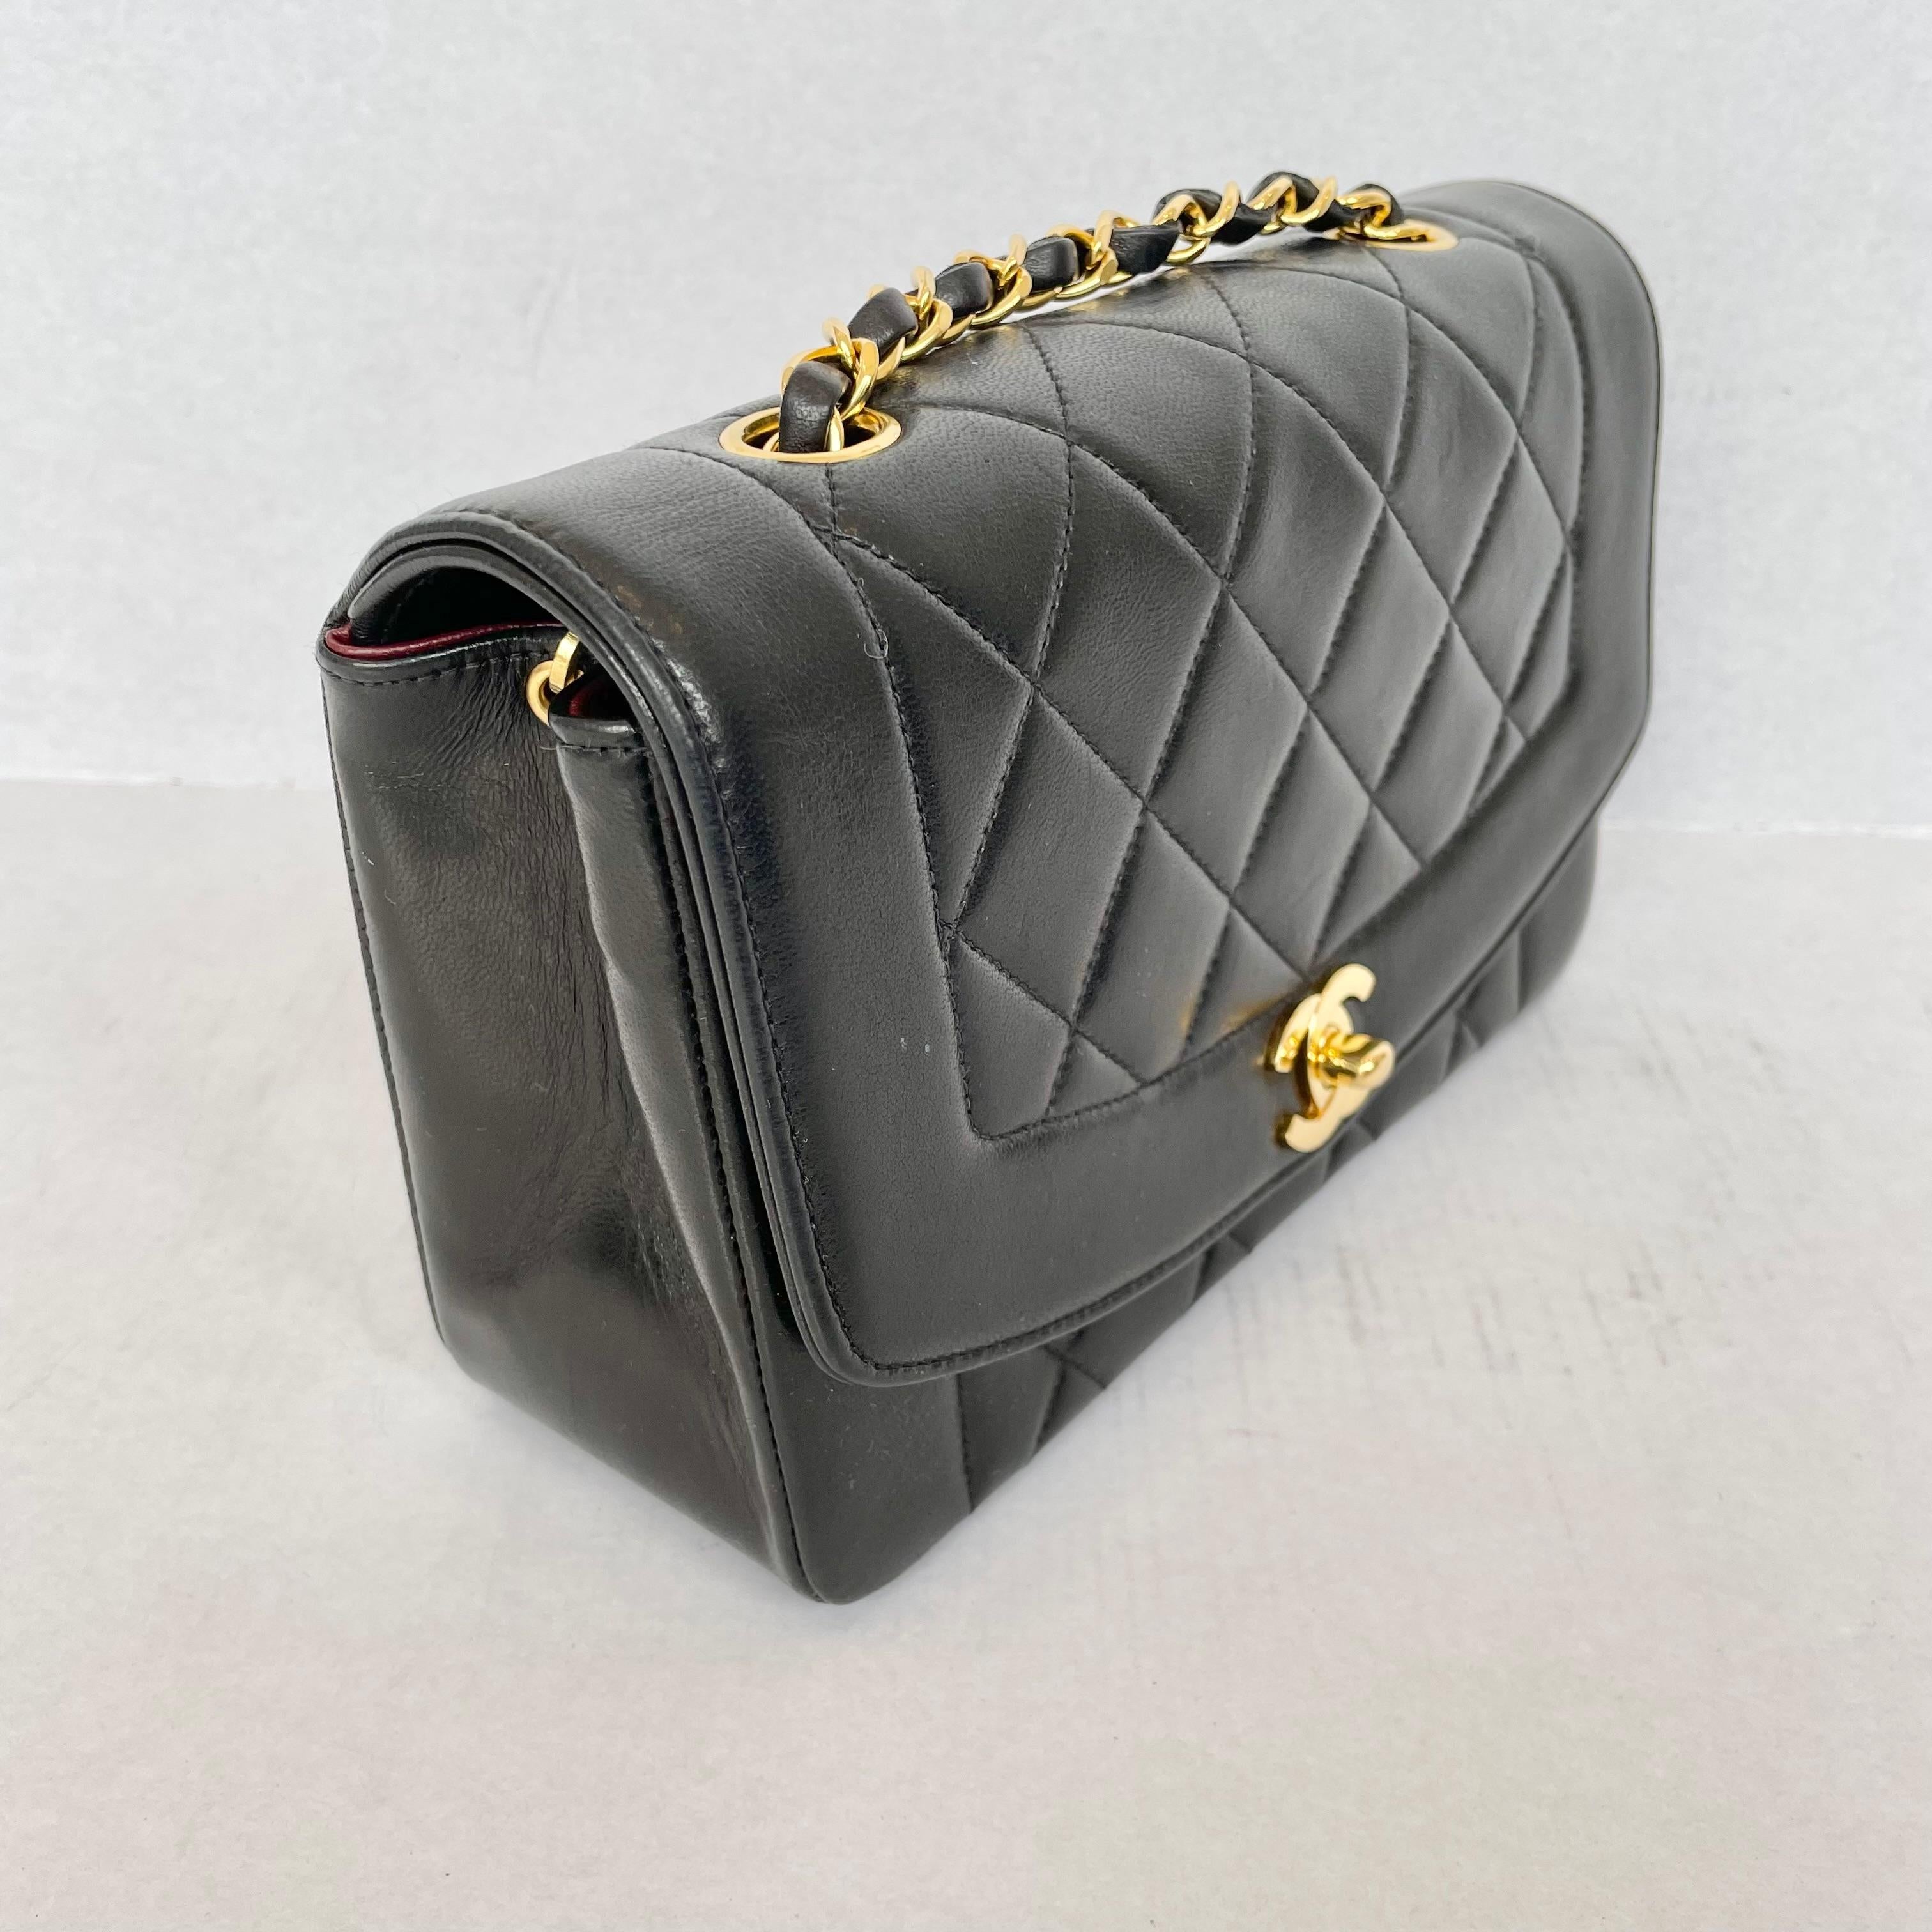 French Rare Chanel Diana Shoulder Bag Black Quilted Lambskin Leather, 1990s France For Sale